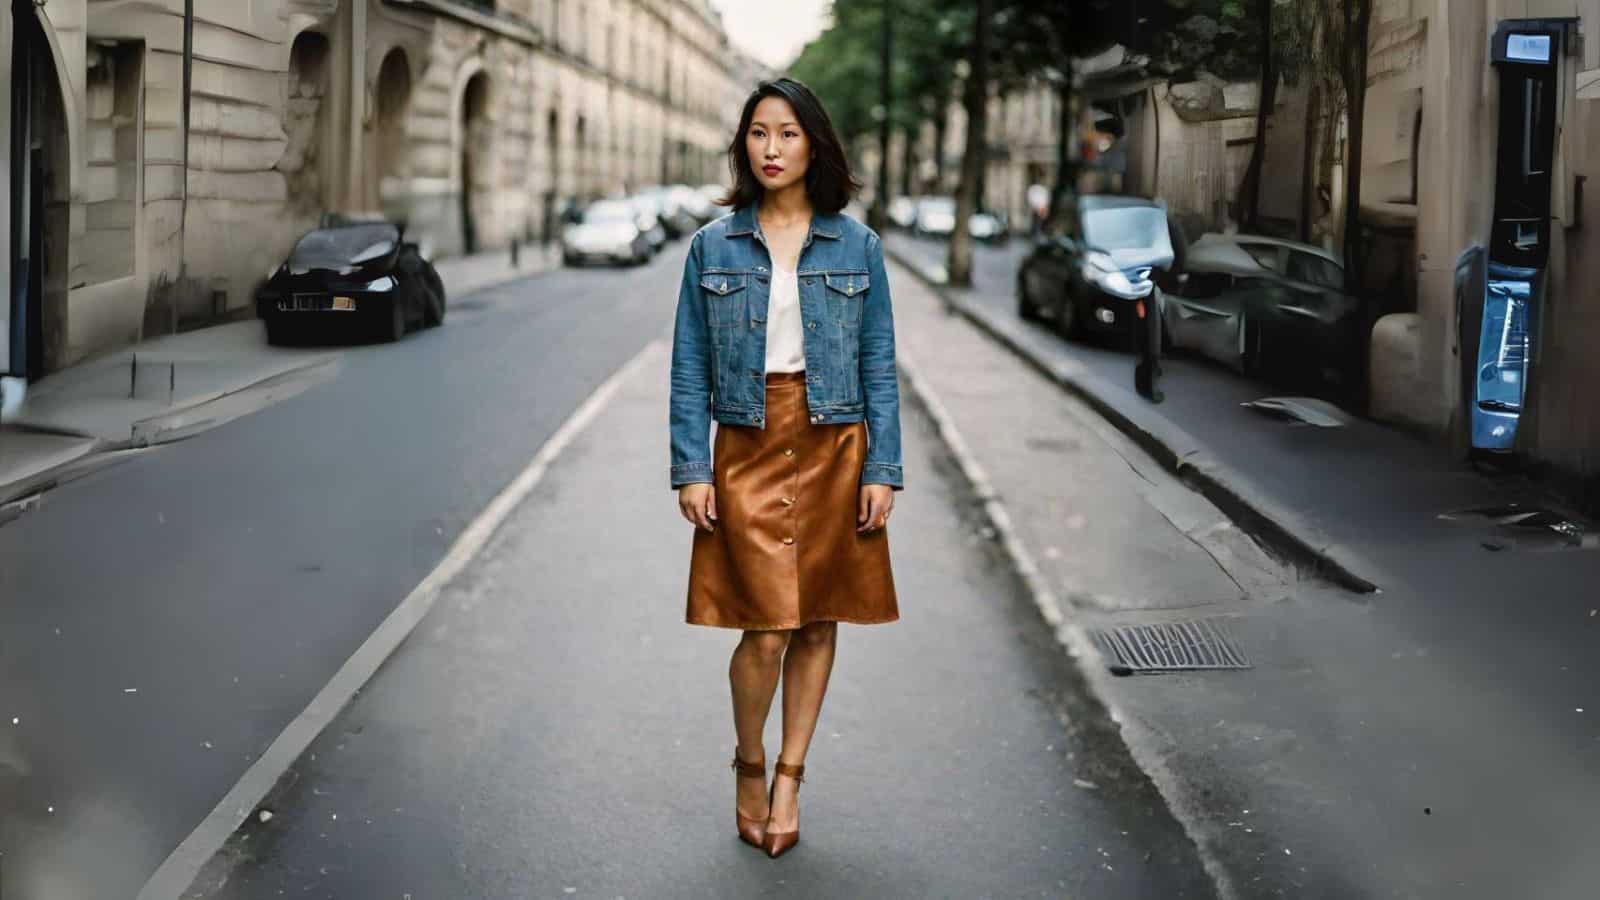 <p>A-Line skirts are universally flattering as their design features a silhouette that naturally cinches the waist and elongates the frame. The structured fit of the denim jacket melds seamlessly with the A-shaped silhouette of the skirt, which also helps give your frame a balanced look and flattering proportions.</p>